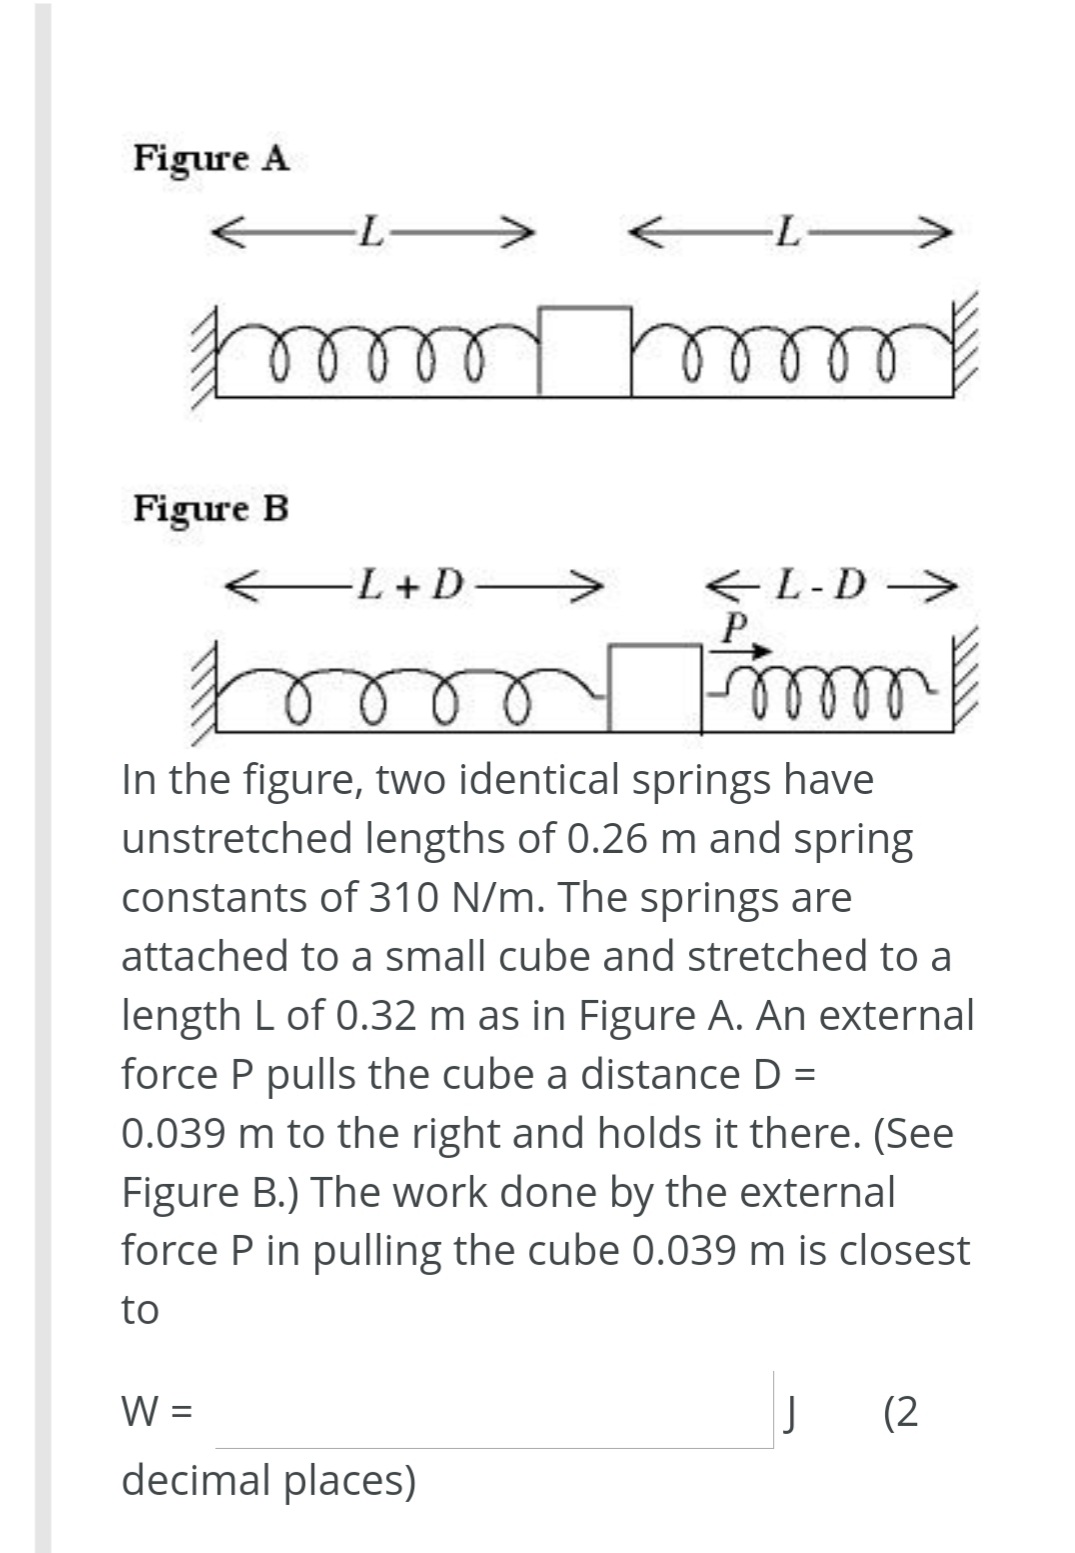 Figure A
->
Figure B
EL +D->
<L-D>
P
Р.
In the figure, two identical springs have
unstretched lengths of 0.26 m and spring
constants of 310 N/m. The springs are
attached to a small cube and stretched to a
length L of 0.32 m as in Figure A. An external
force P pulls the cube a distance D =
0.039 m to the right and holds it there. (See
Figure B.) The work done by the external
force P in pulling the cube 0.039 m is closest
%3|
to
W =
(2
decimal places)
